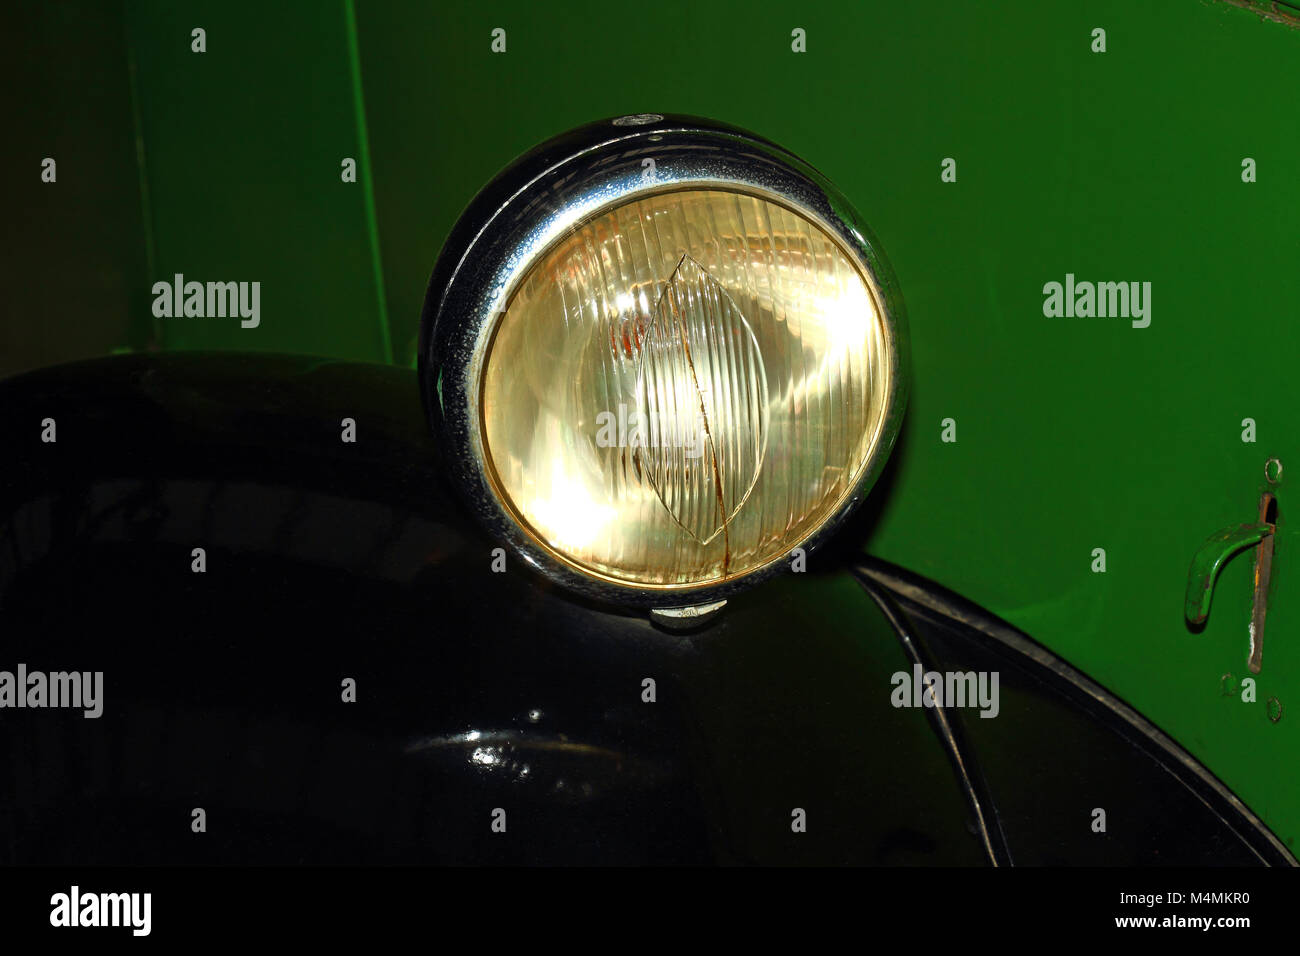 Old vintage car headlight on a green vehicle Stock Photo